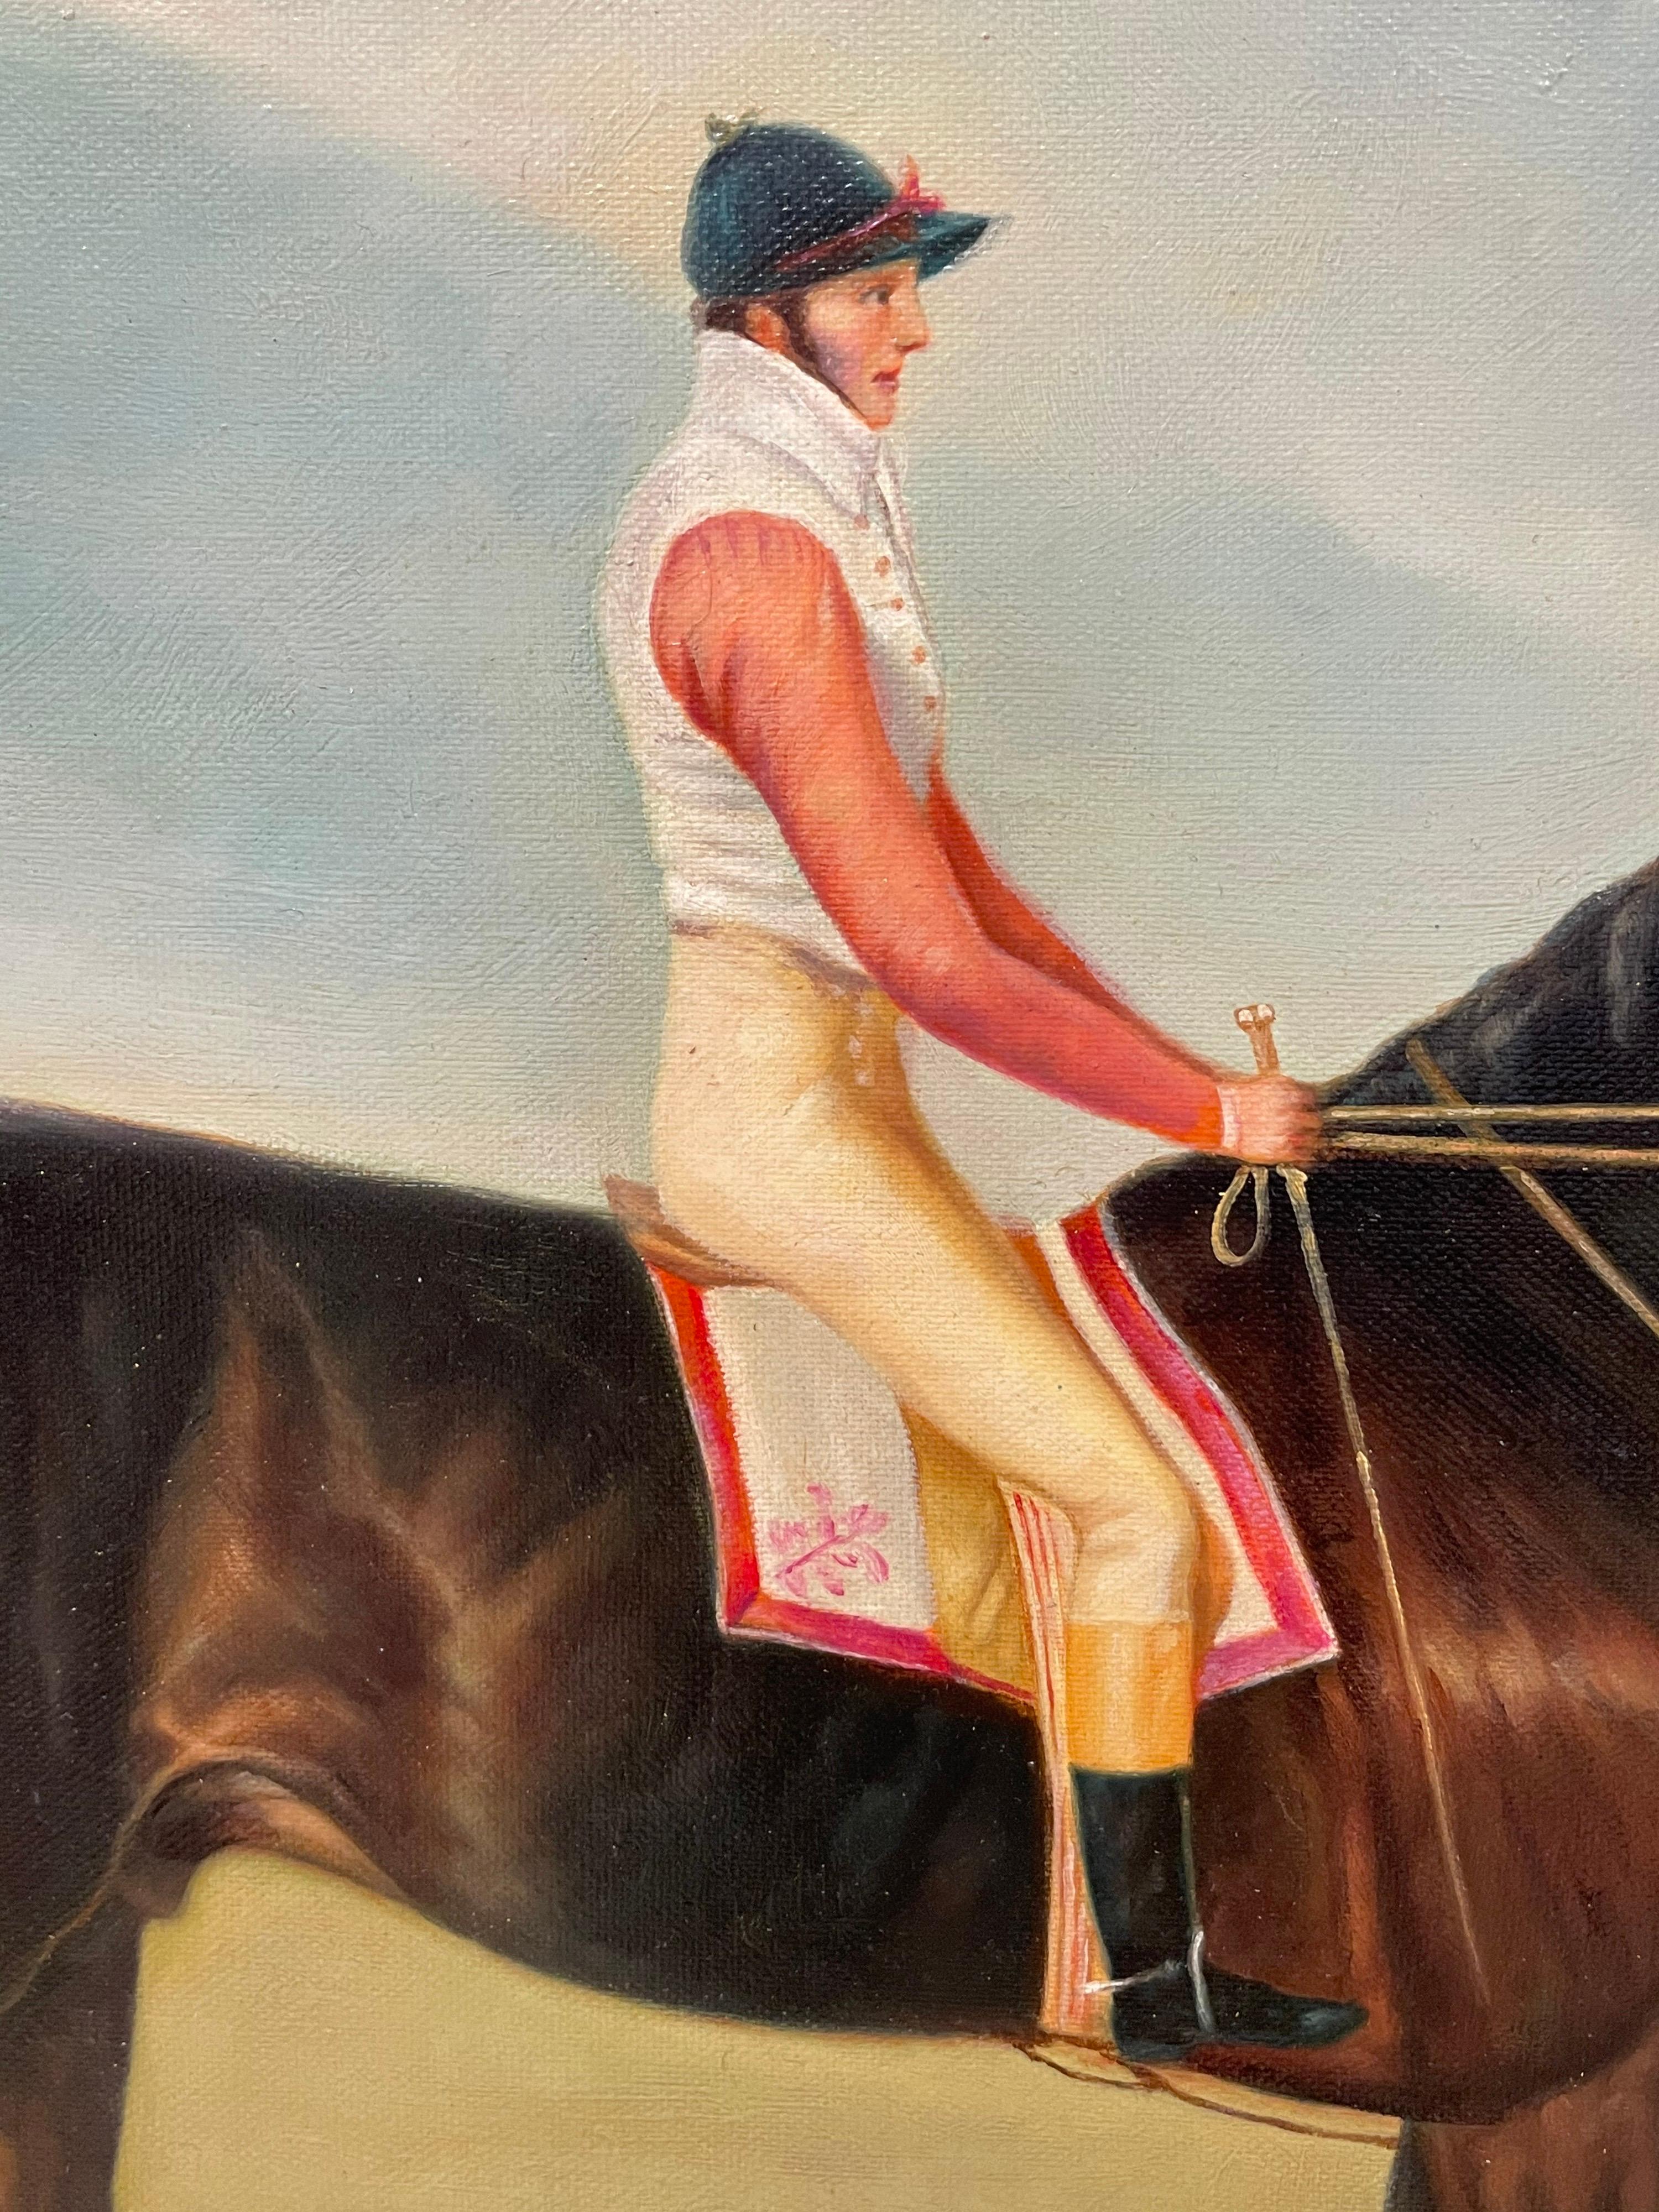 classical horse paintings